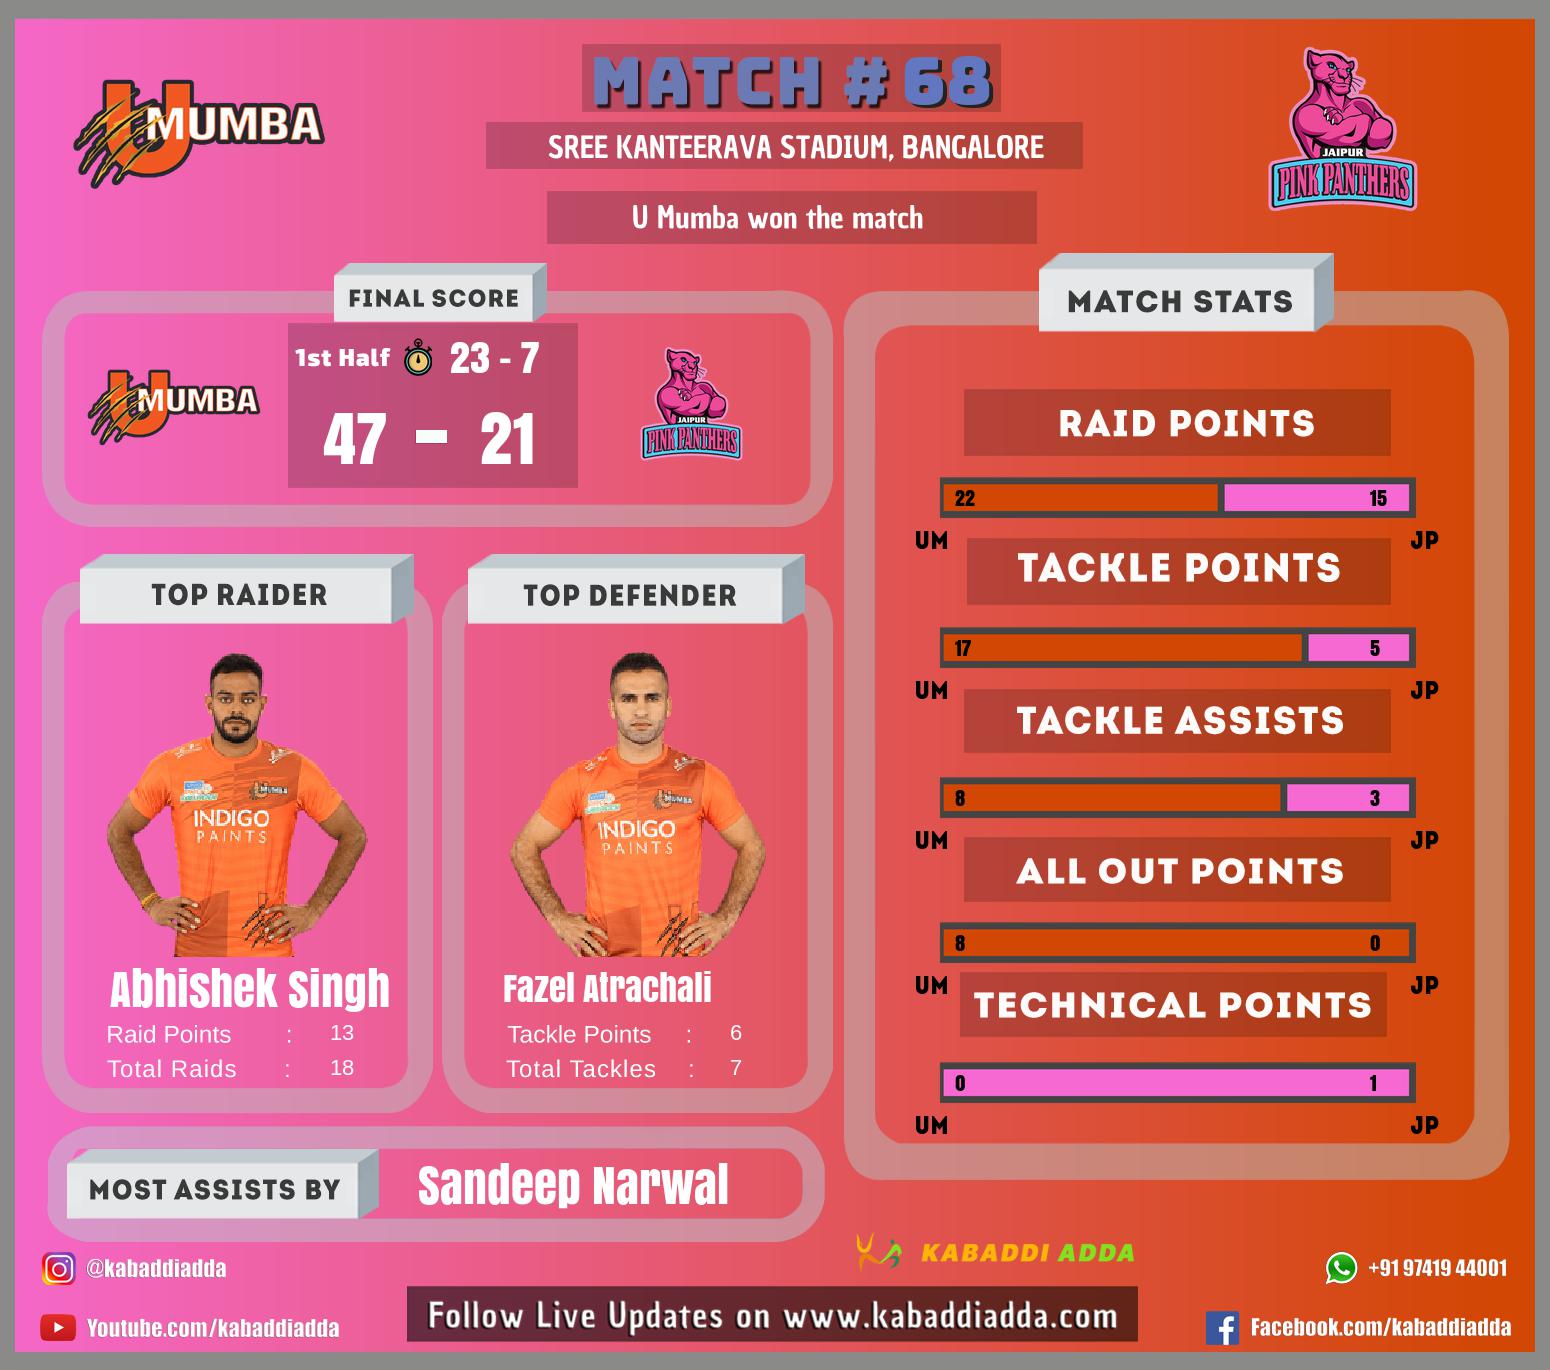 Young raiders have grabbed the opportunity to deliver Abishek scored 13 points, Arjun scored 6 points